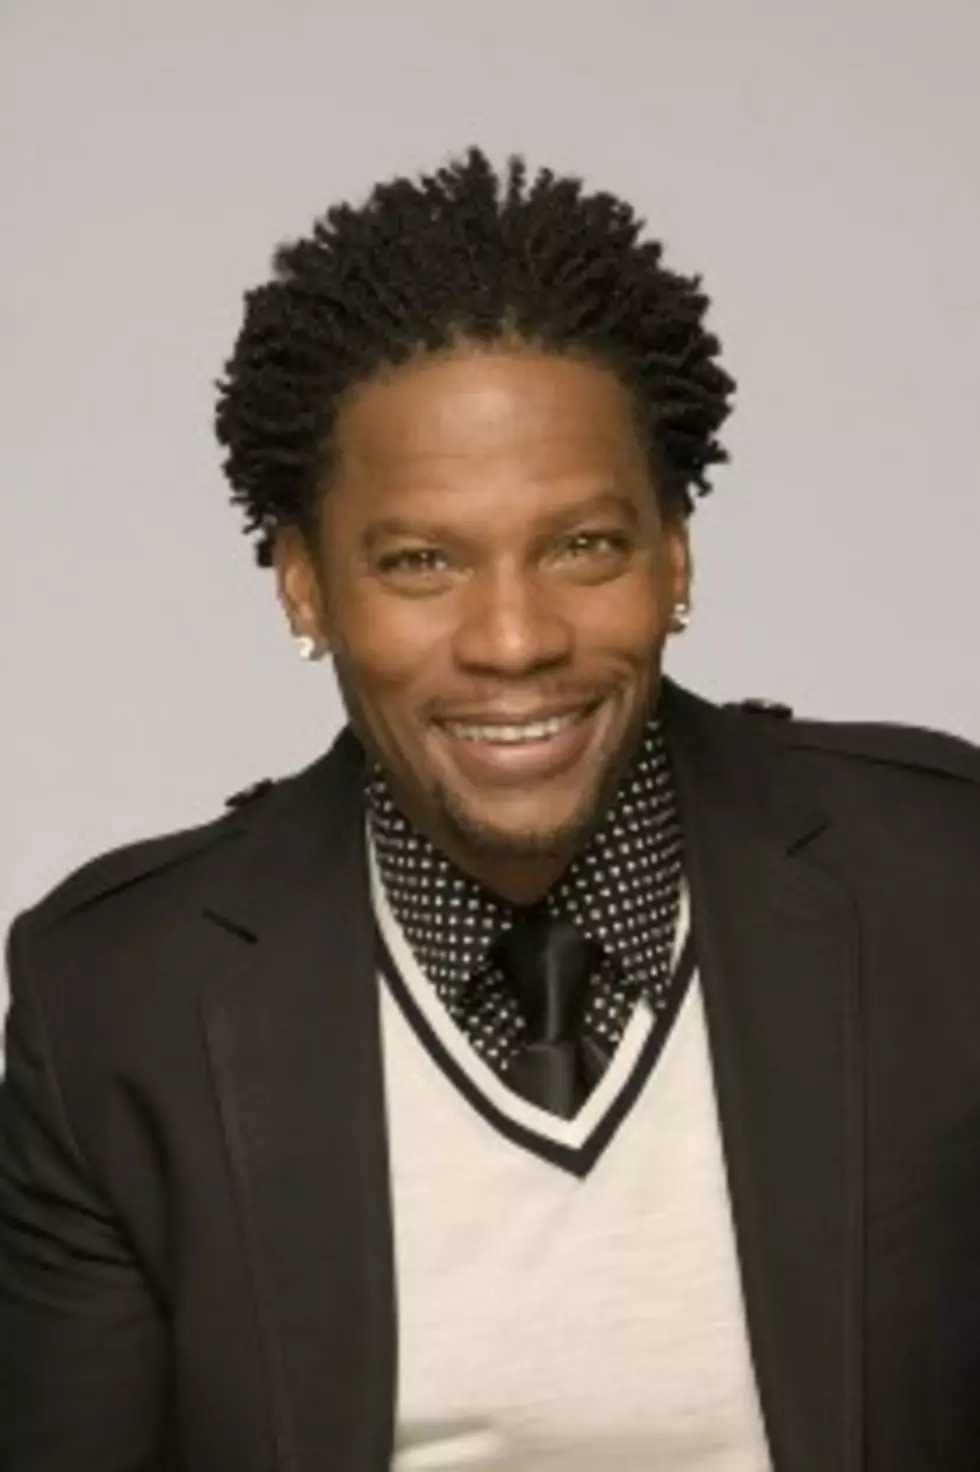 D.L. Hughley Interview With Dj Supreme [AUDIO]